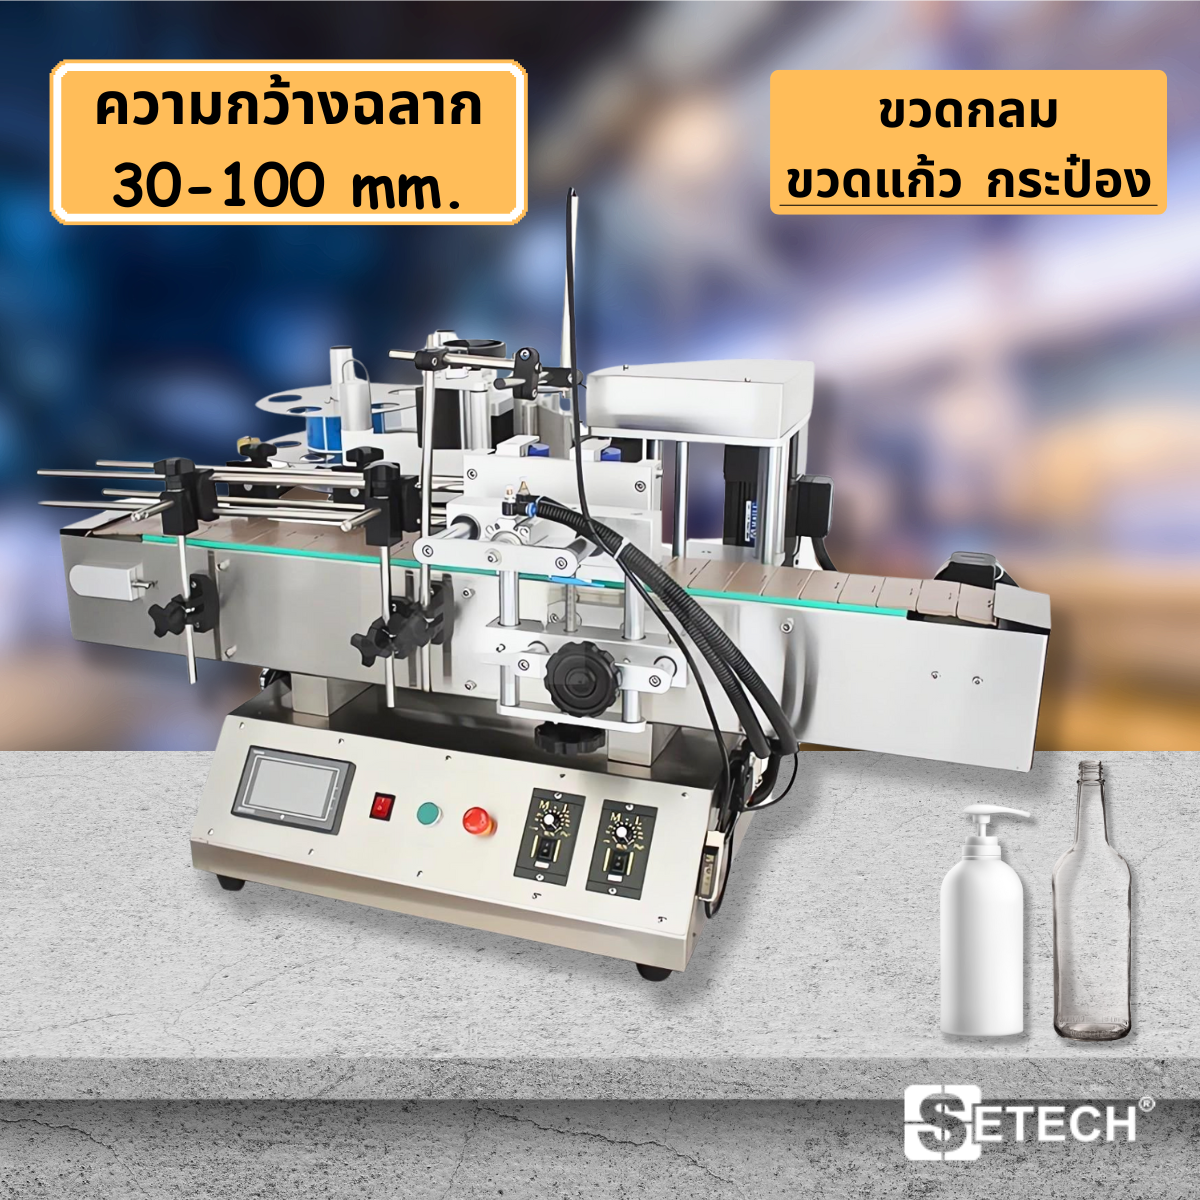 Automatic labeling machine desktop type belt system for round containers label width 30-100 mm